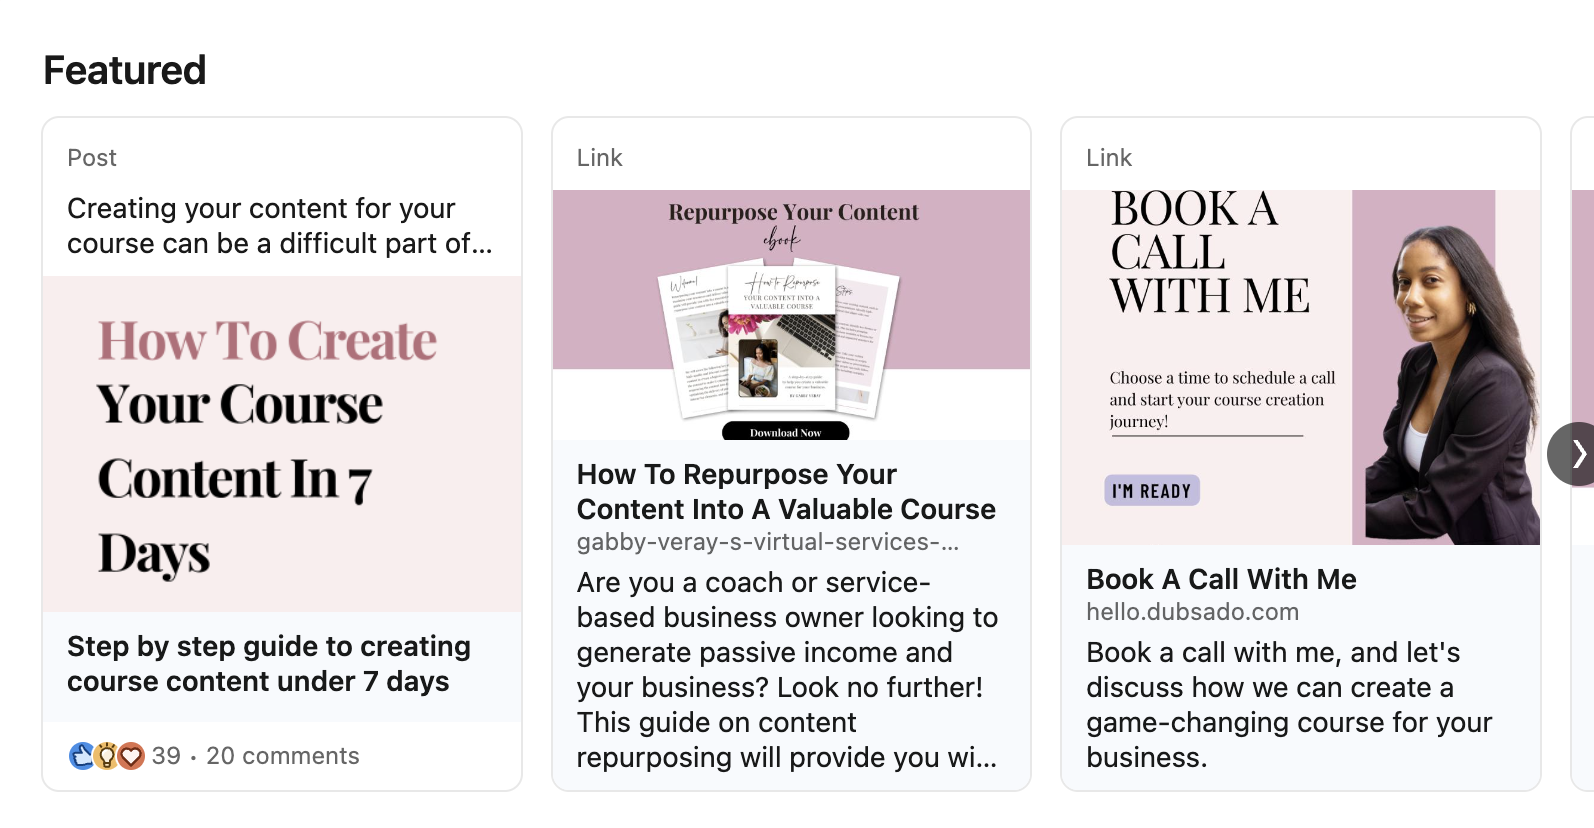 featured content section on a linkedin profile